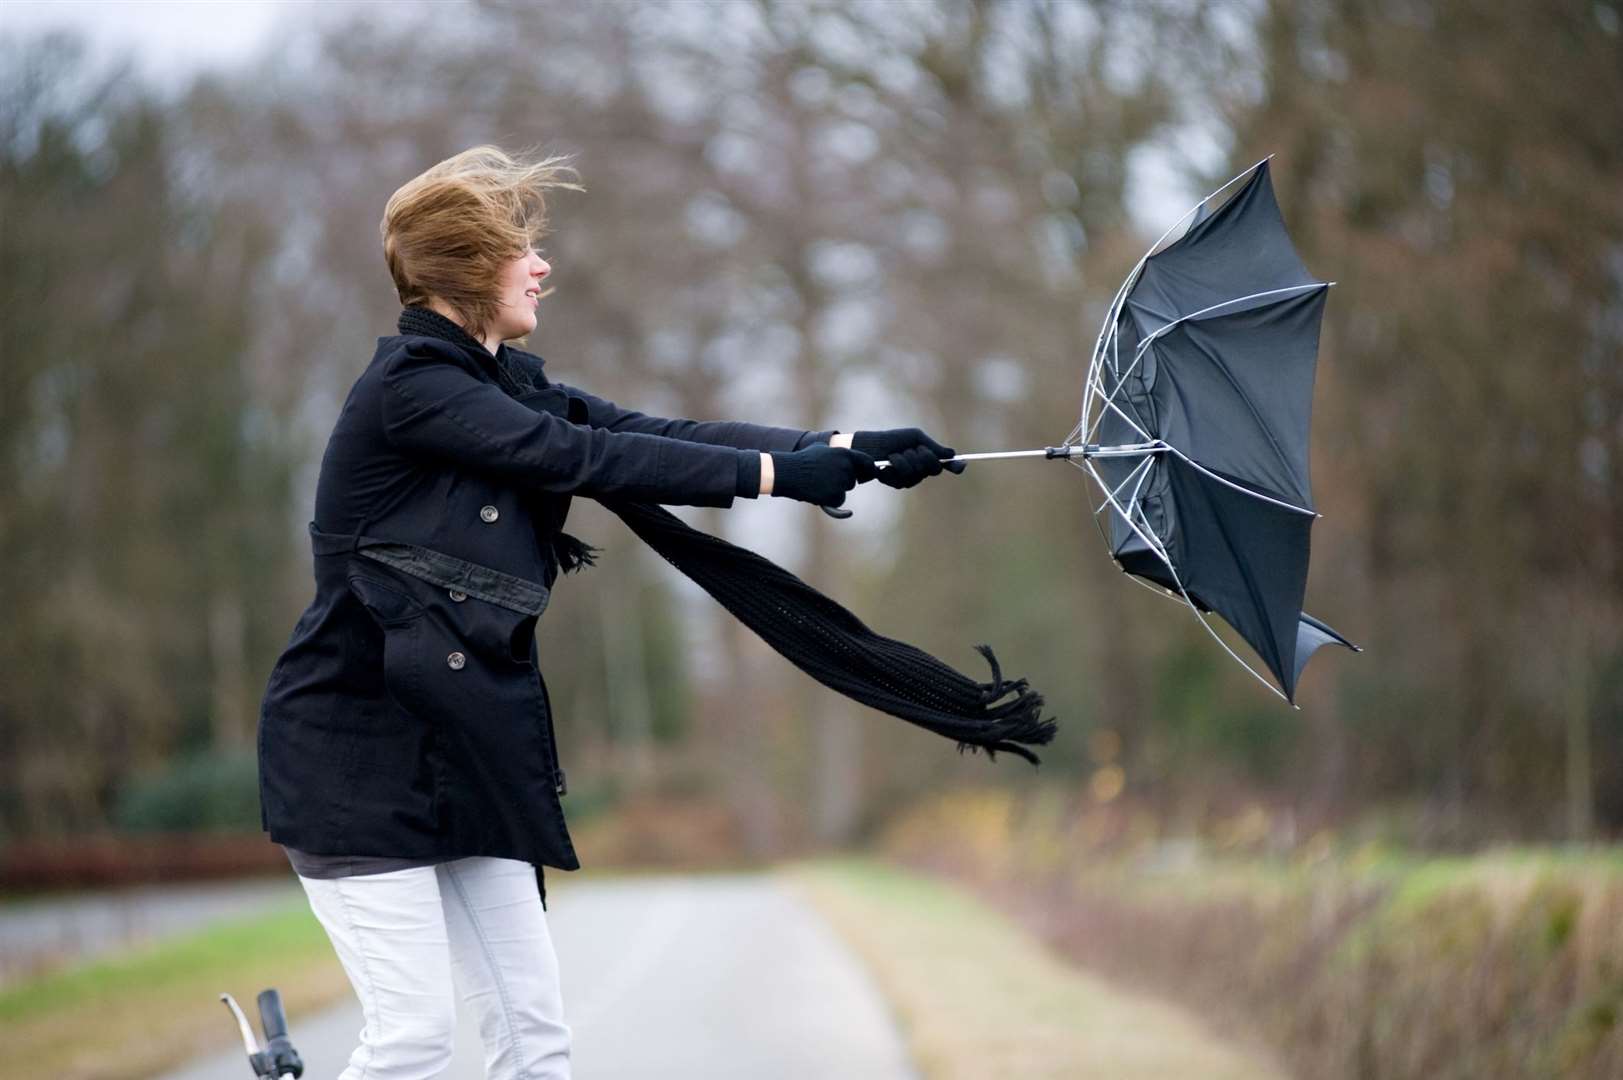 A weather warning for strong wind has been issued by the Met Office. Picture: iStock